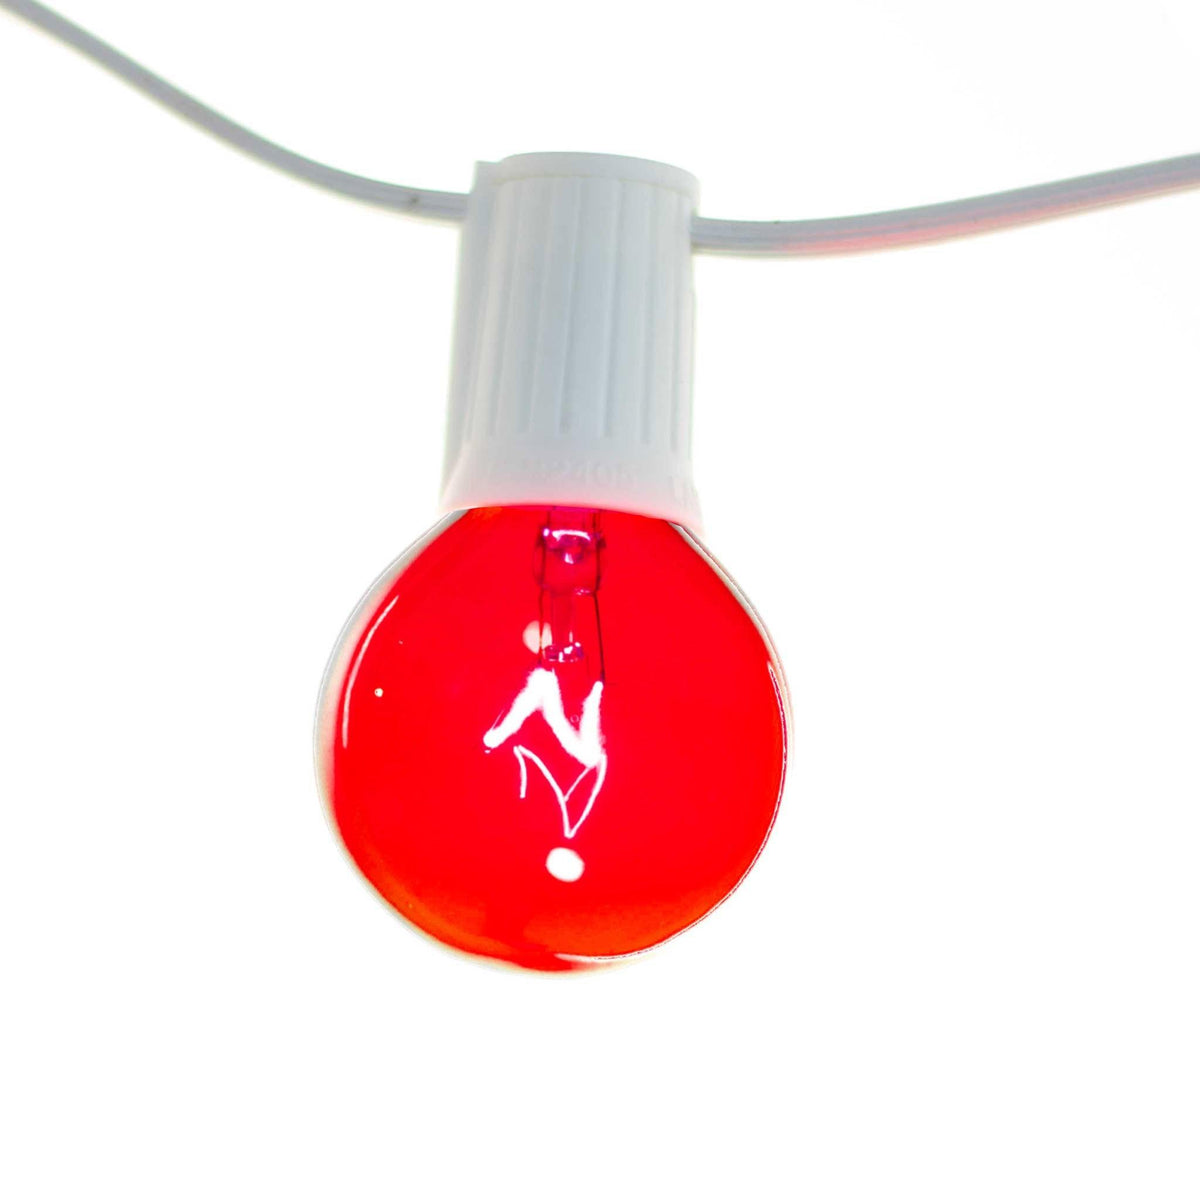 1 Box of 25 of brand new transparent Red G40 Globe Light Bulbs Replace your old bulbs today from leedisplay.com